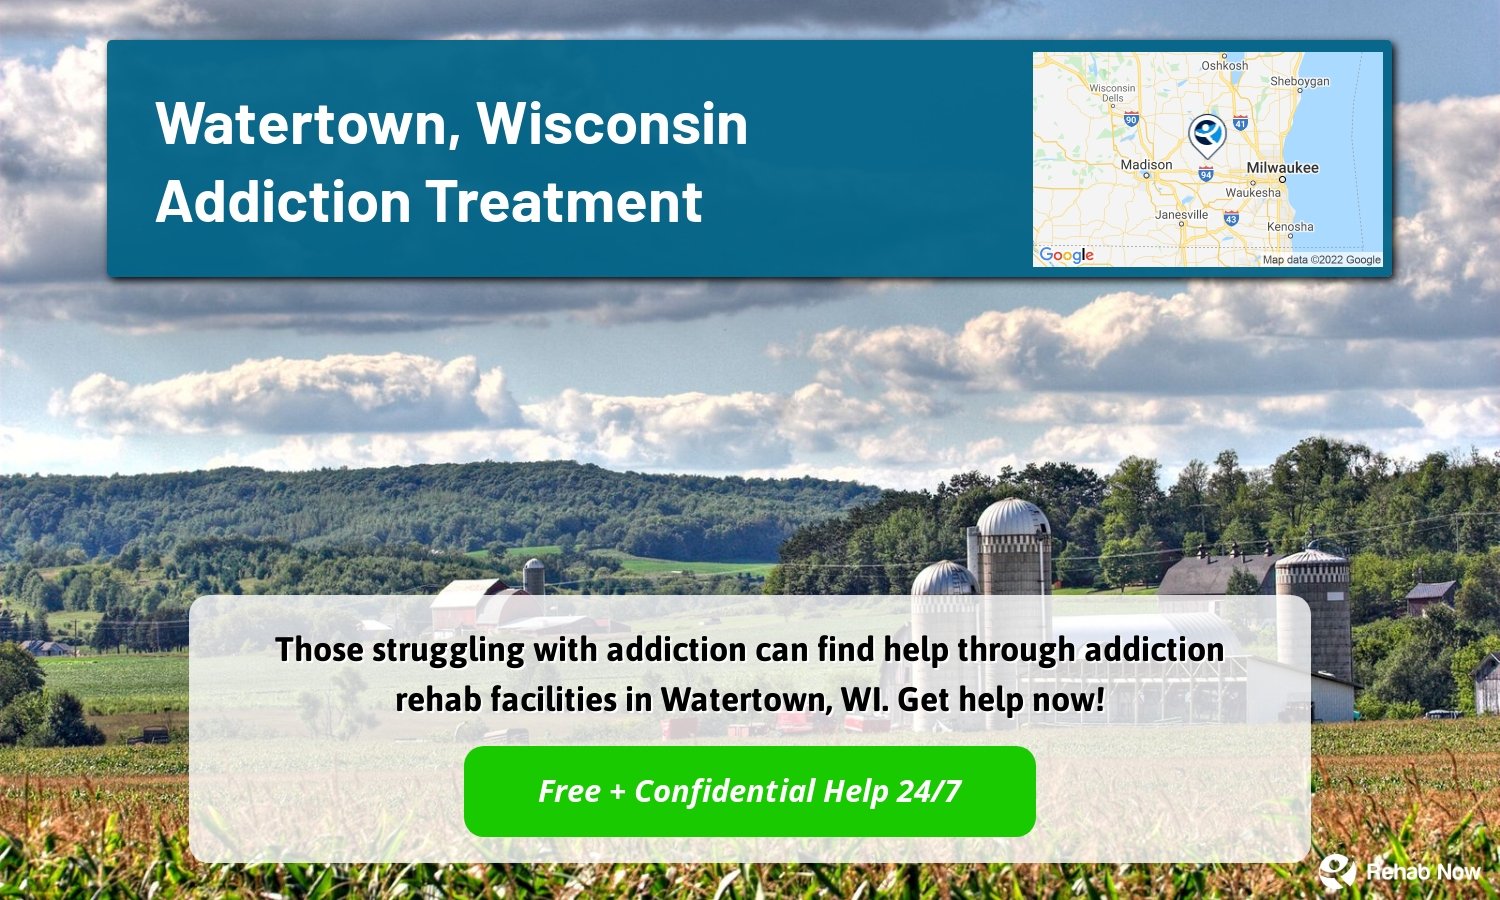 Those struggling with addiction can find help through addiction rehab facilities in Watertown, WI. Get help now!